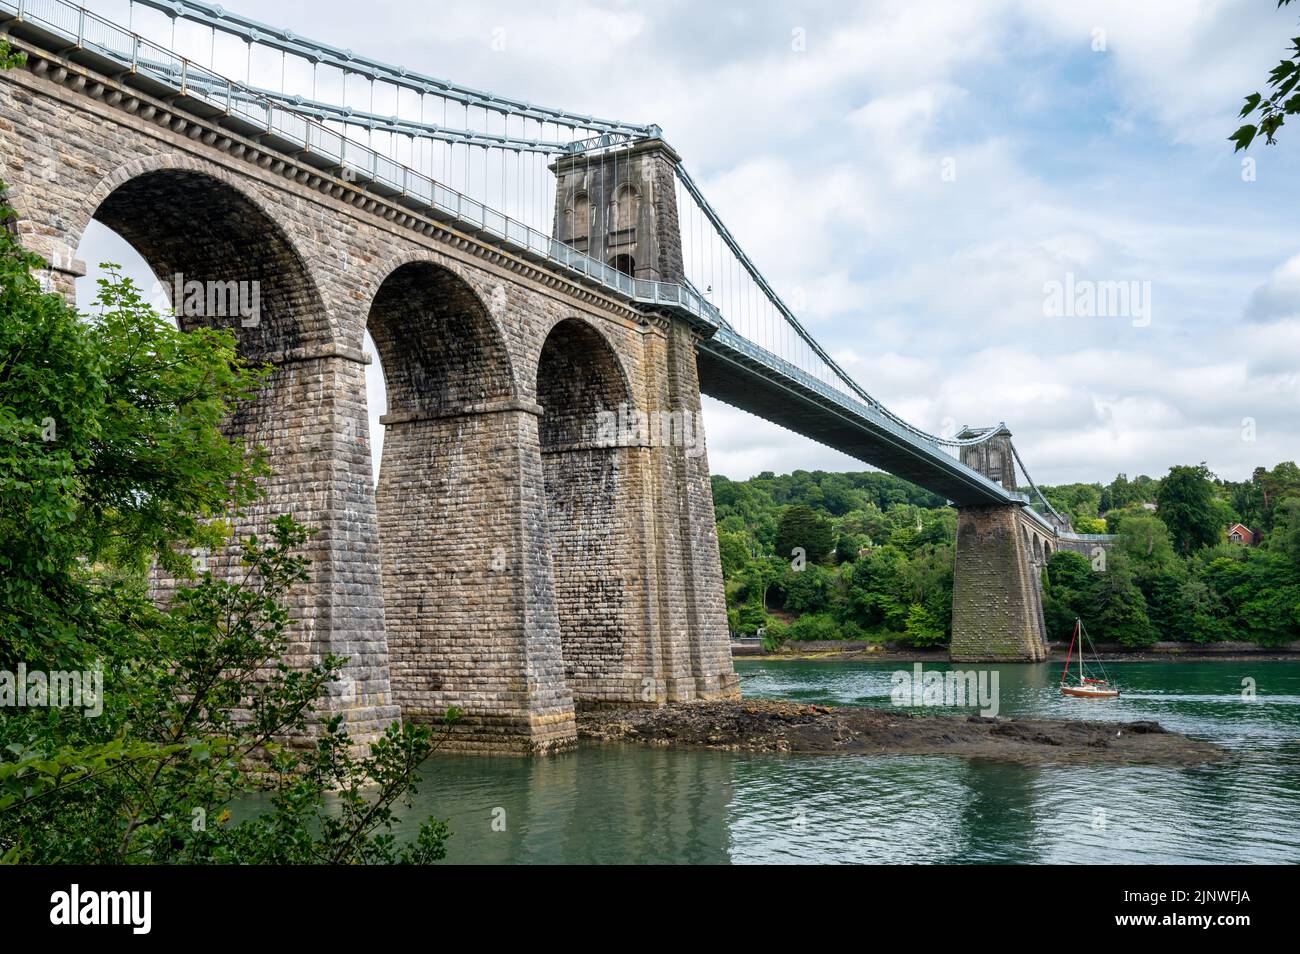 Menai Suspension Bridge built by Thomas Telford that connects the Island of Anglesey to mainland Wales Stock Photo